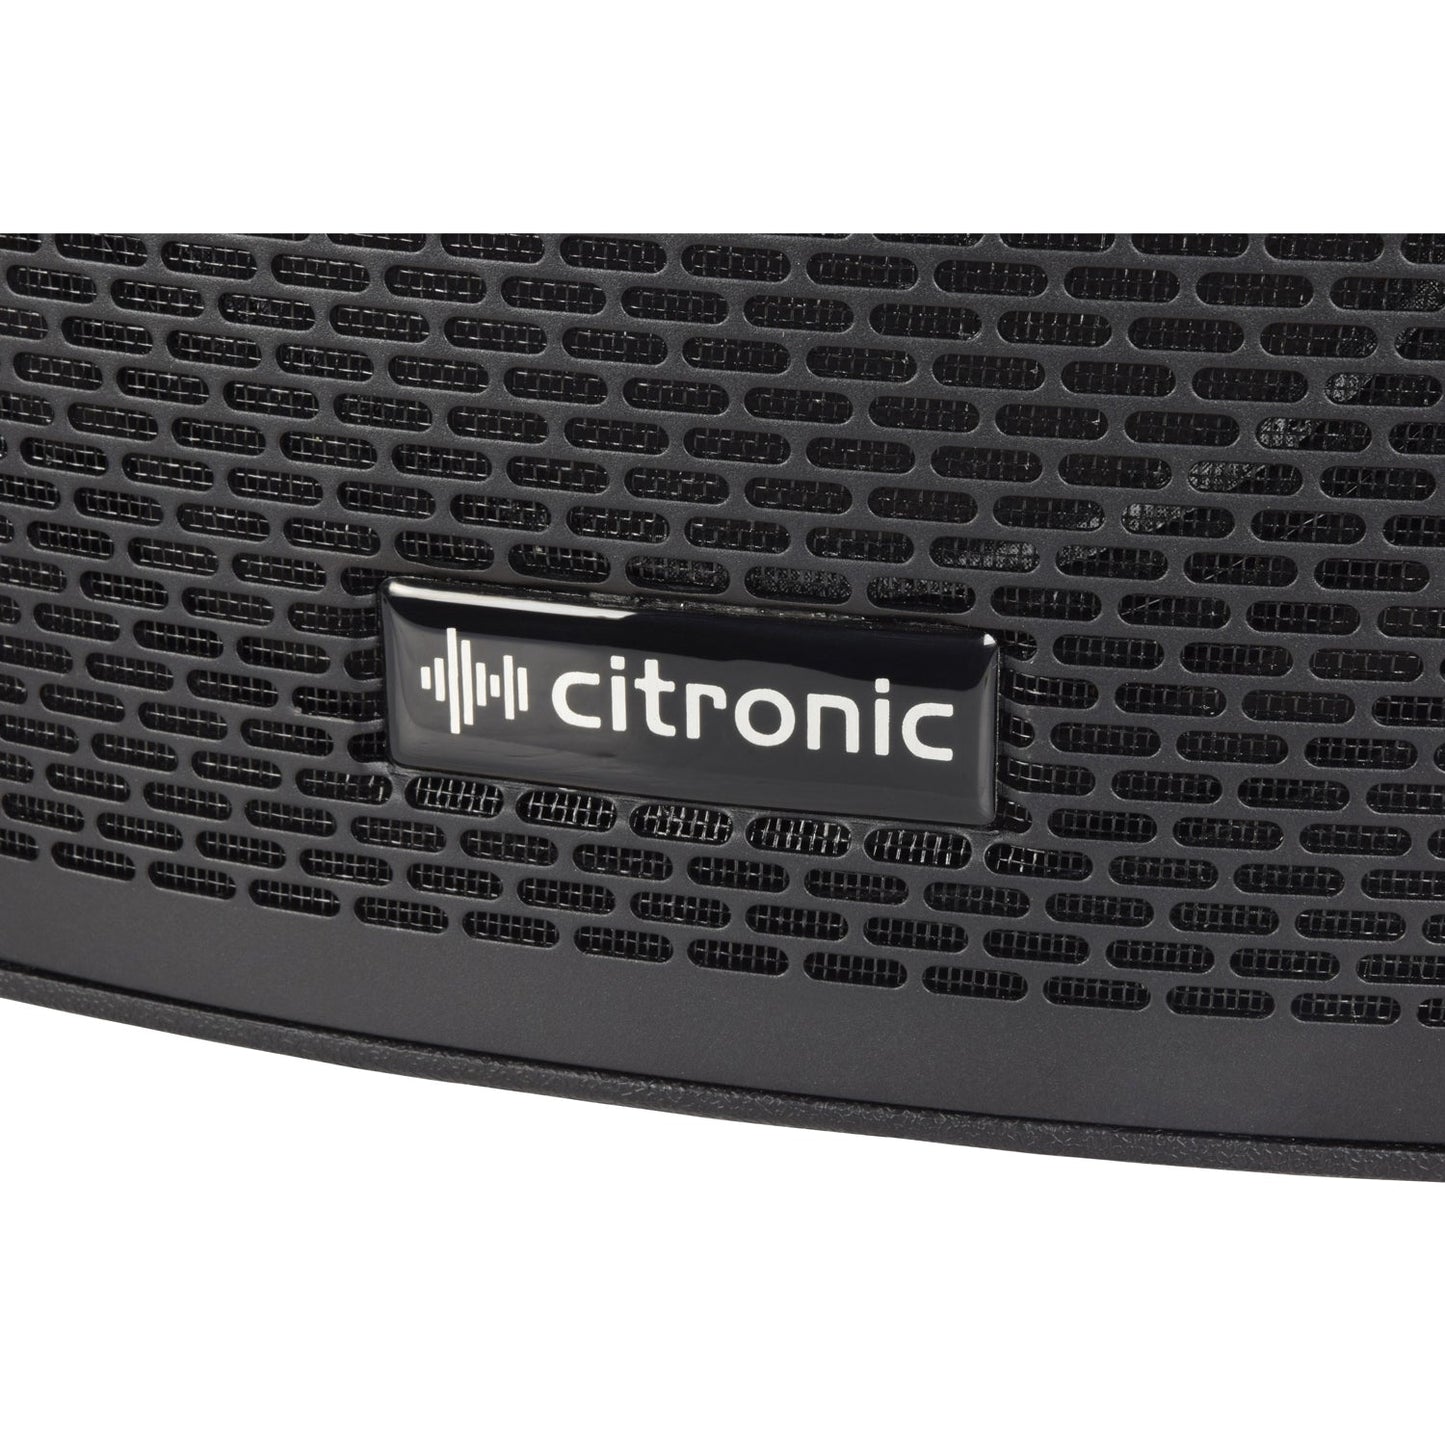 Citronic 15 inch Bluetooth Stereo Linkable PA Powerful Loud Active Digital Amp Mixer Speakers with Stands